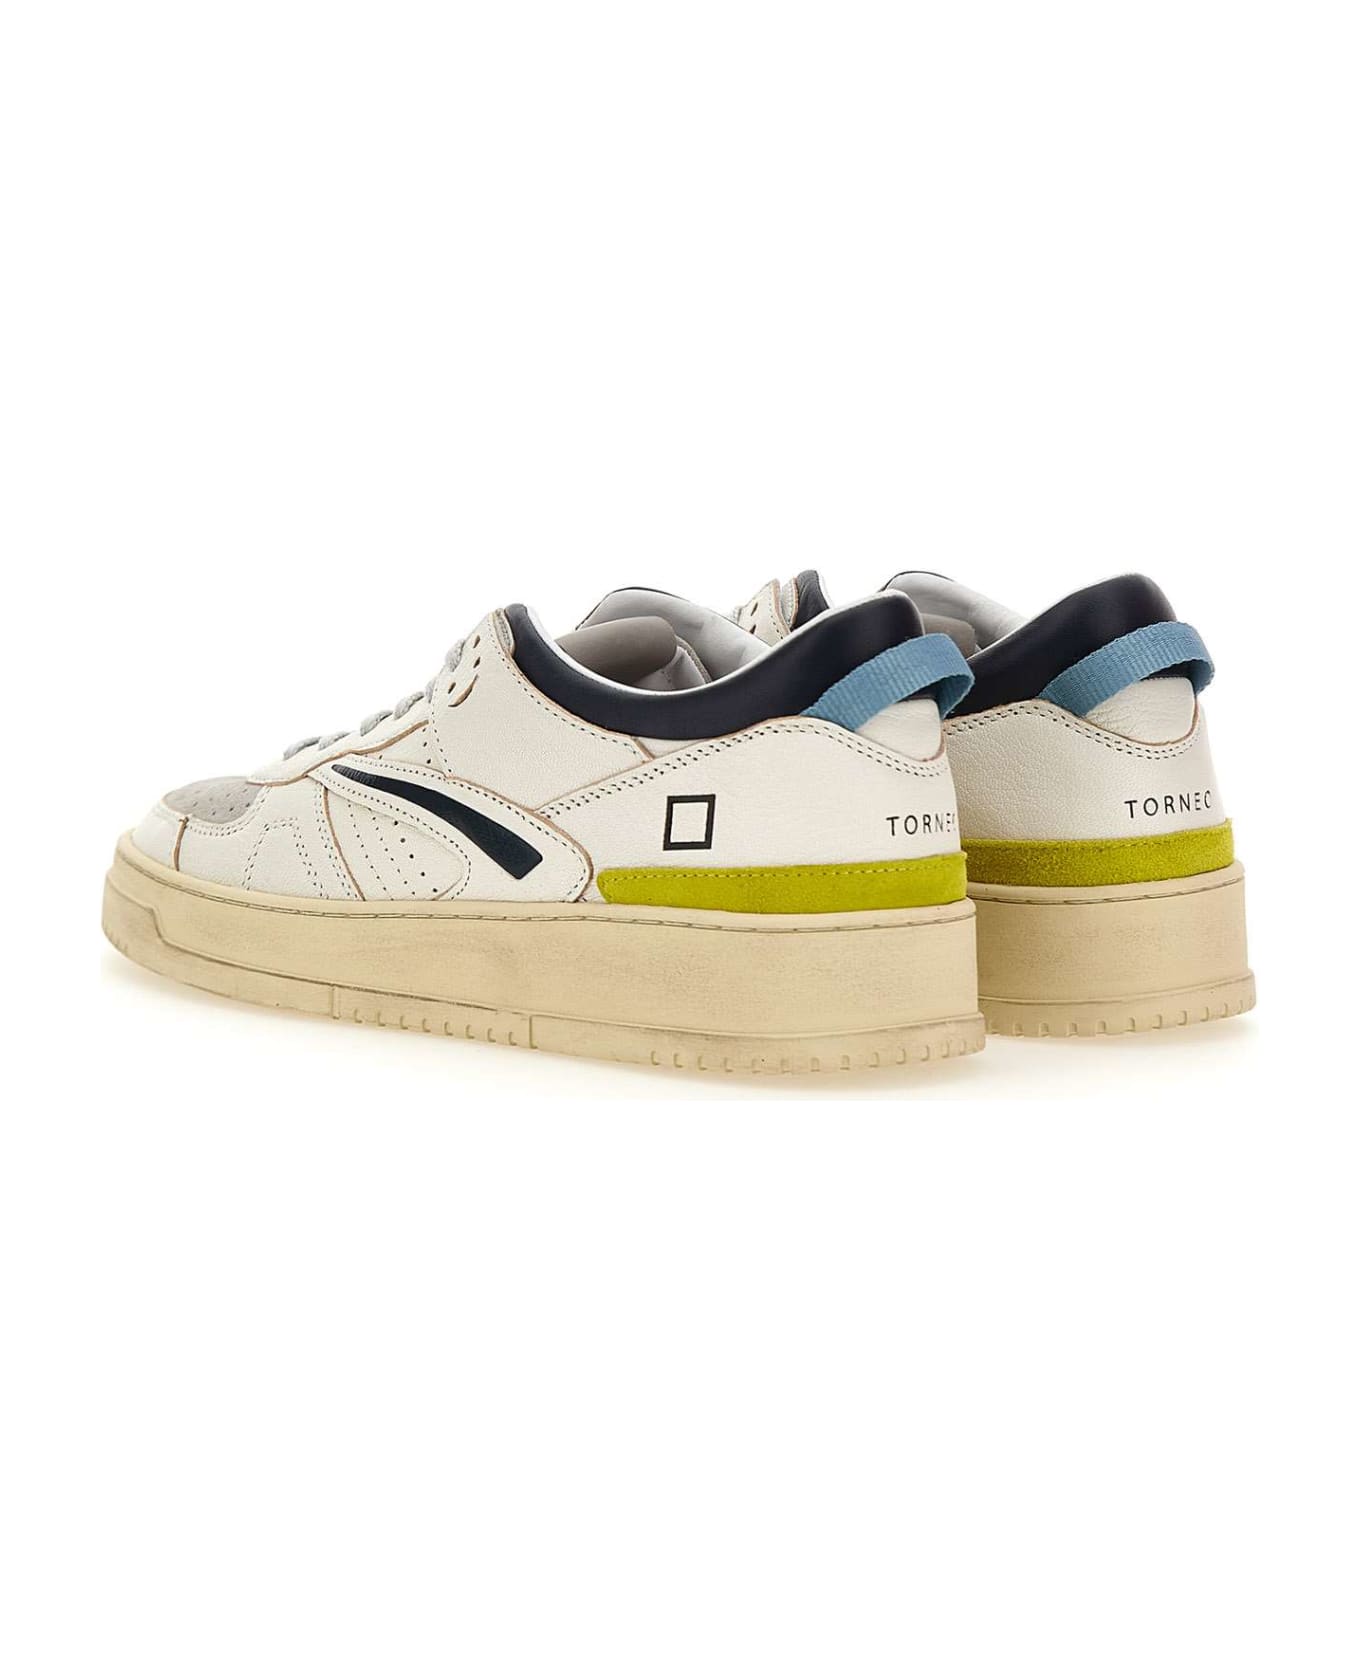 D.A.T.E. "torneo Colored" Leather Sneakers - WHITE